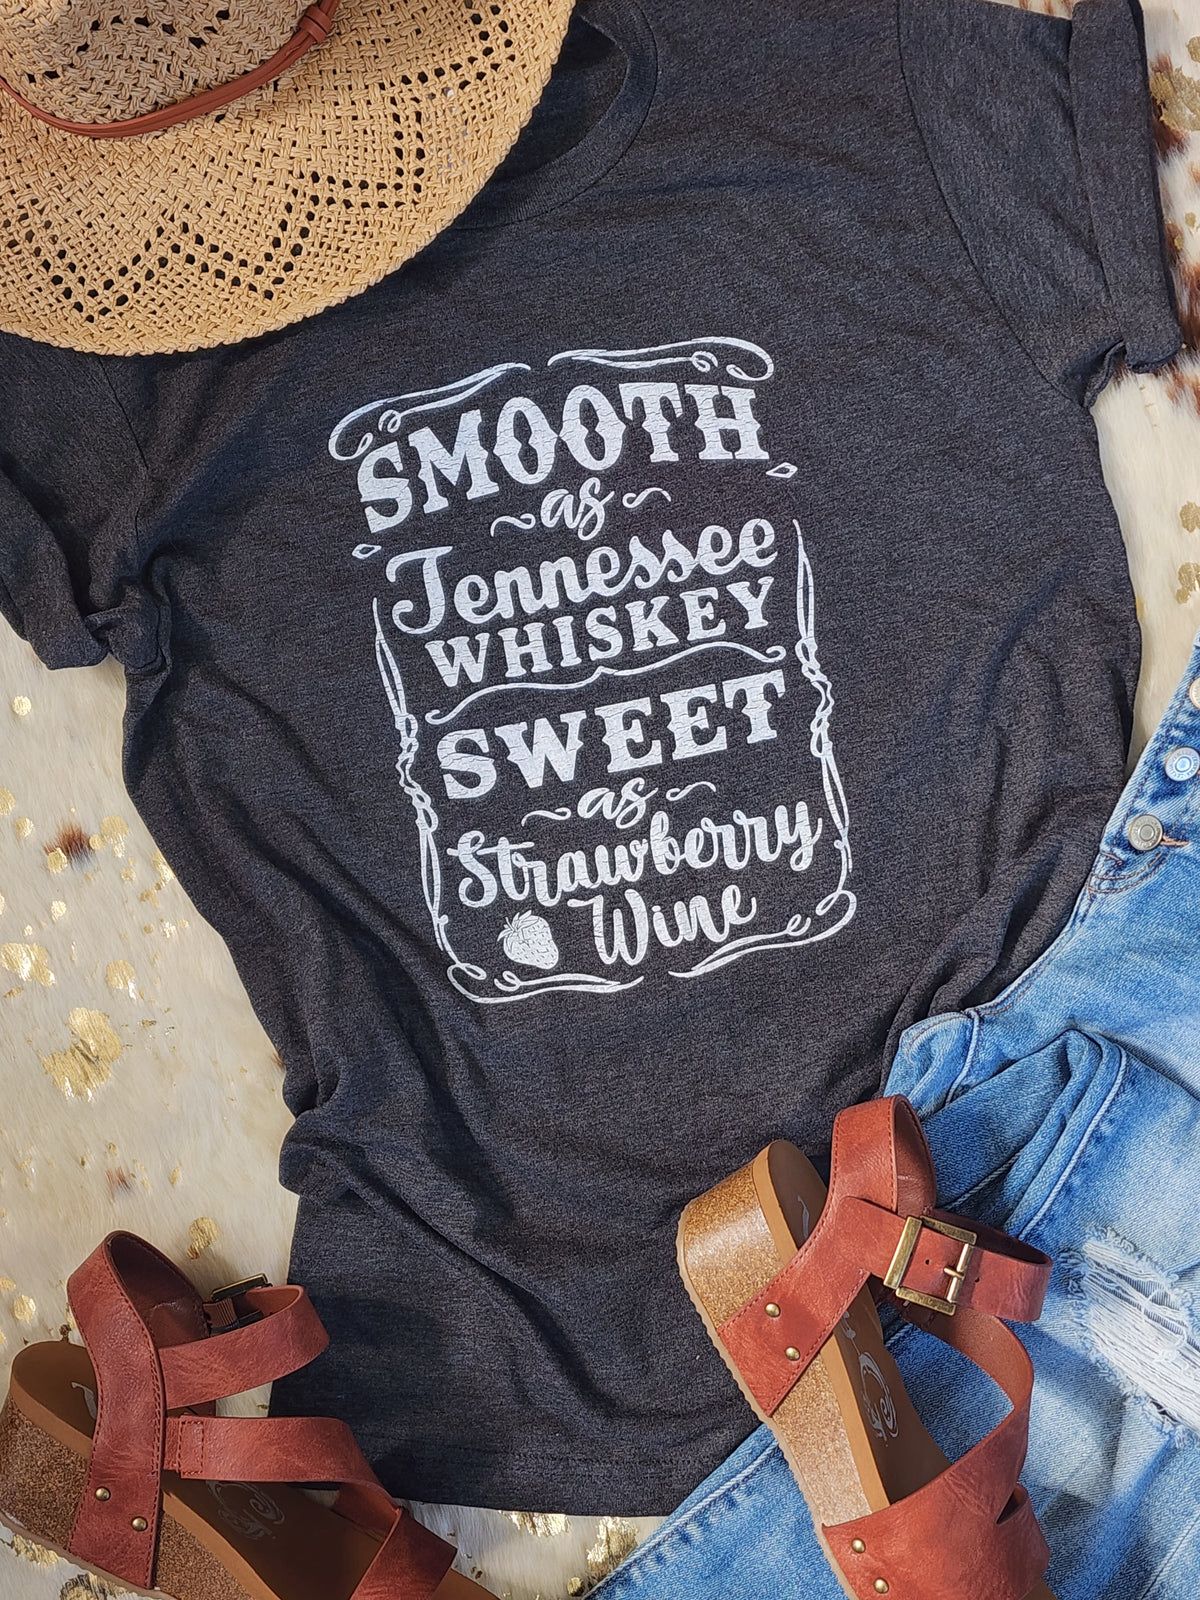 Smooth as Tennesee Whiskey, Sweet as Strawberry Wine" graphic tee